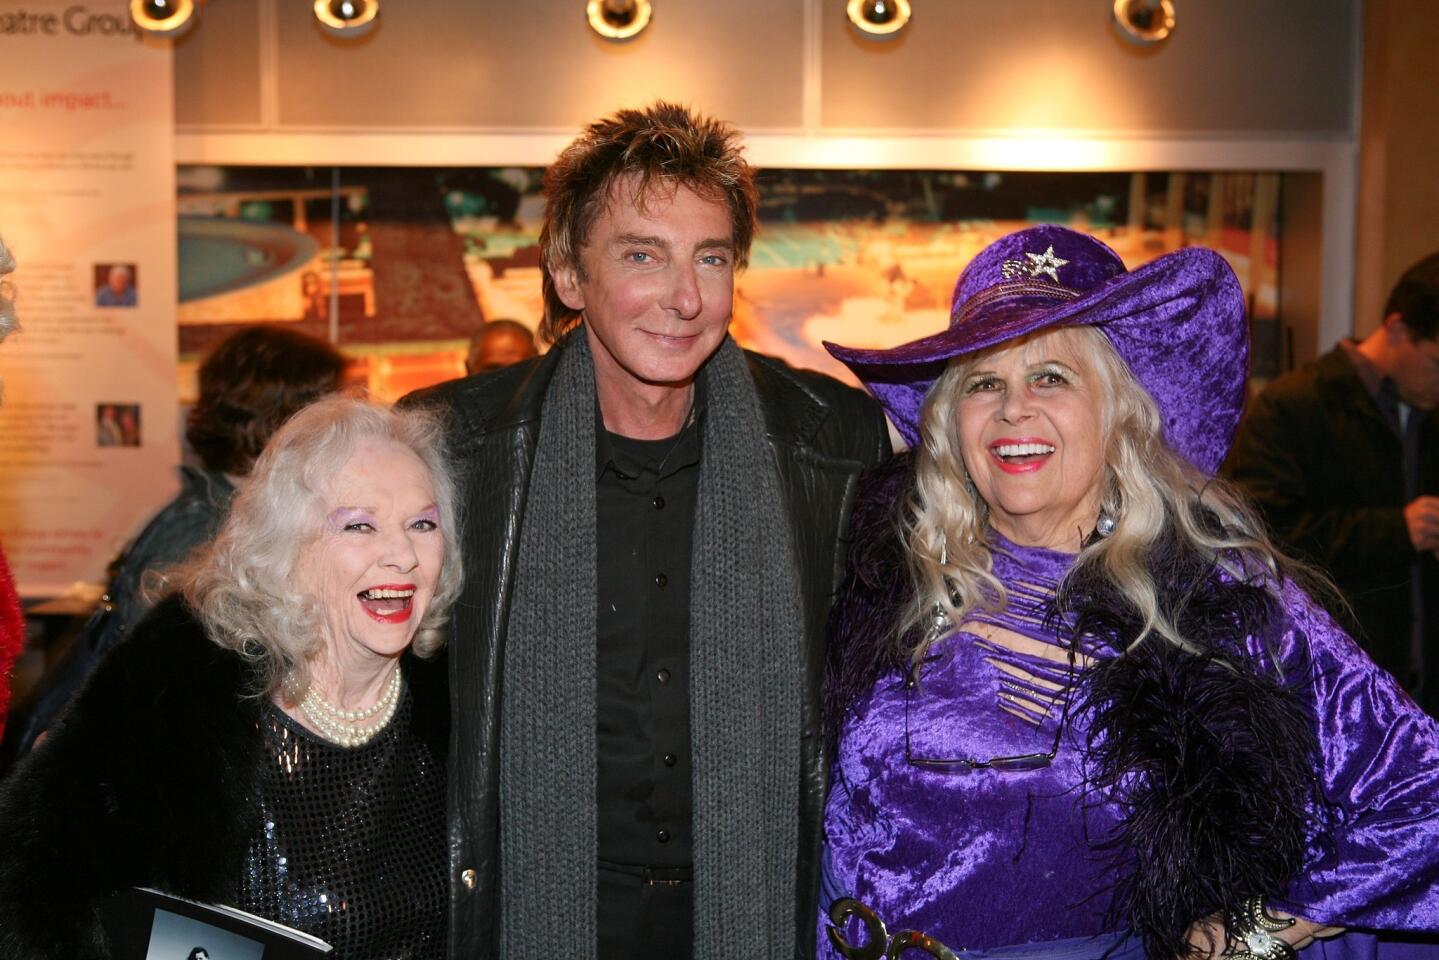 From left, Minsky's burlesque dancer Dixie Evans, Barry Manilow and Gloria Pall pose before the world premiere of the musical "Minsky's" at Ahmanson Theater in Los Angeles.